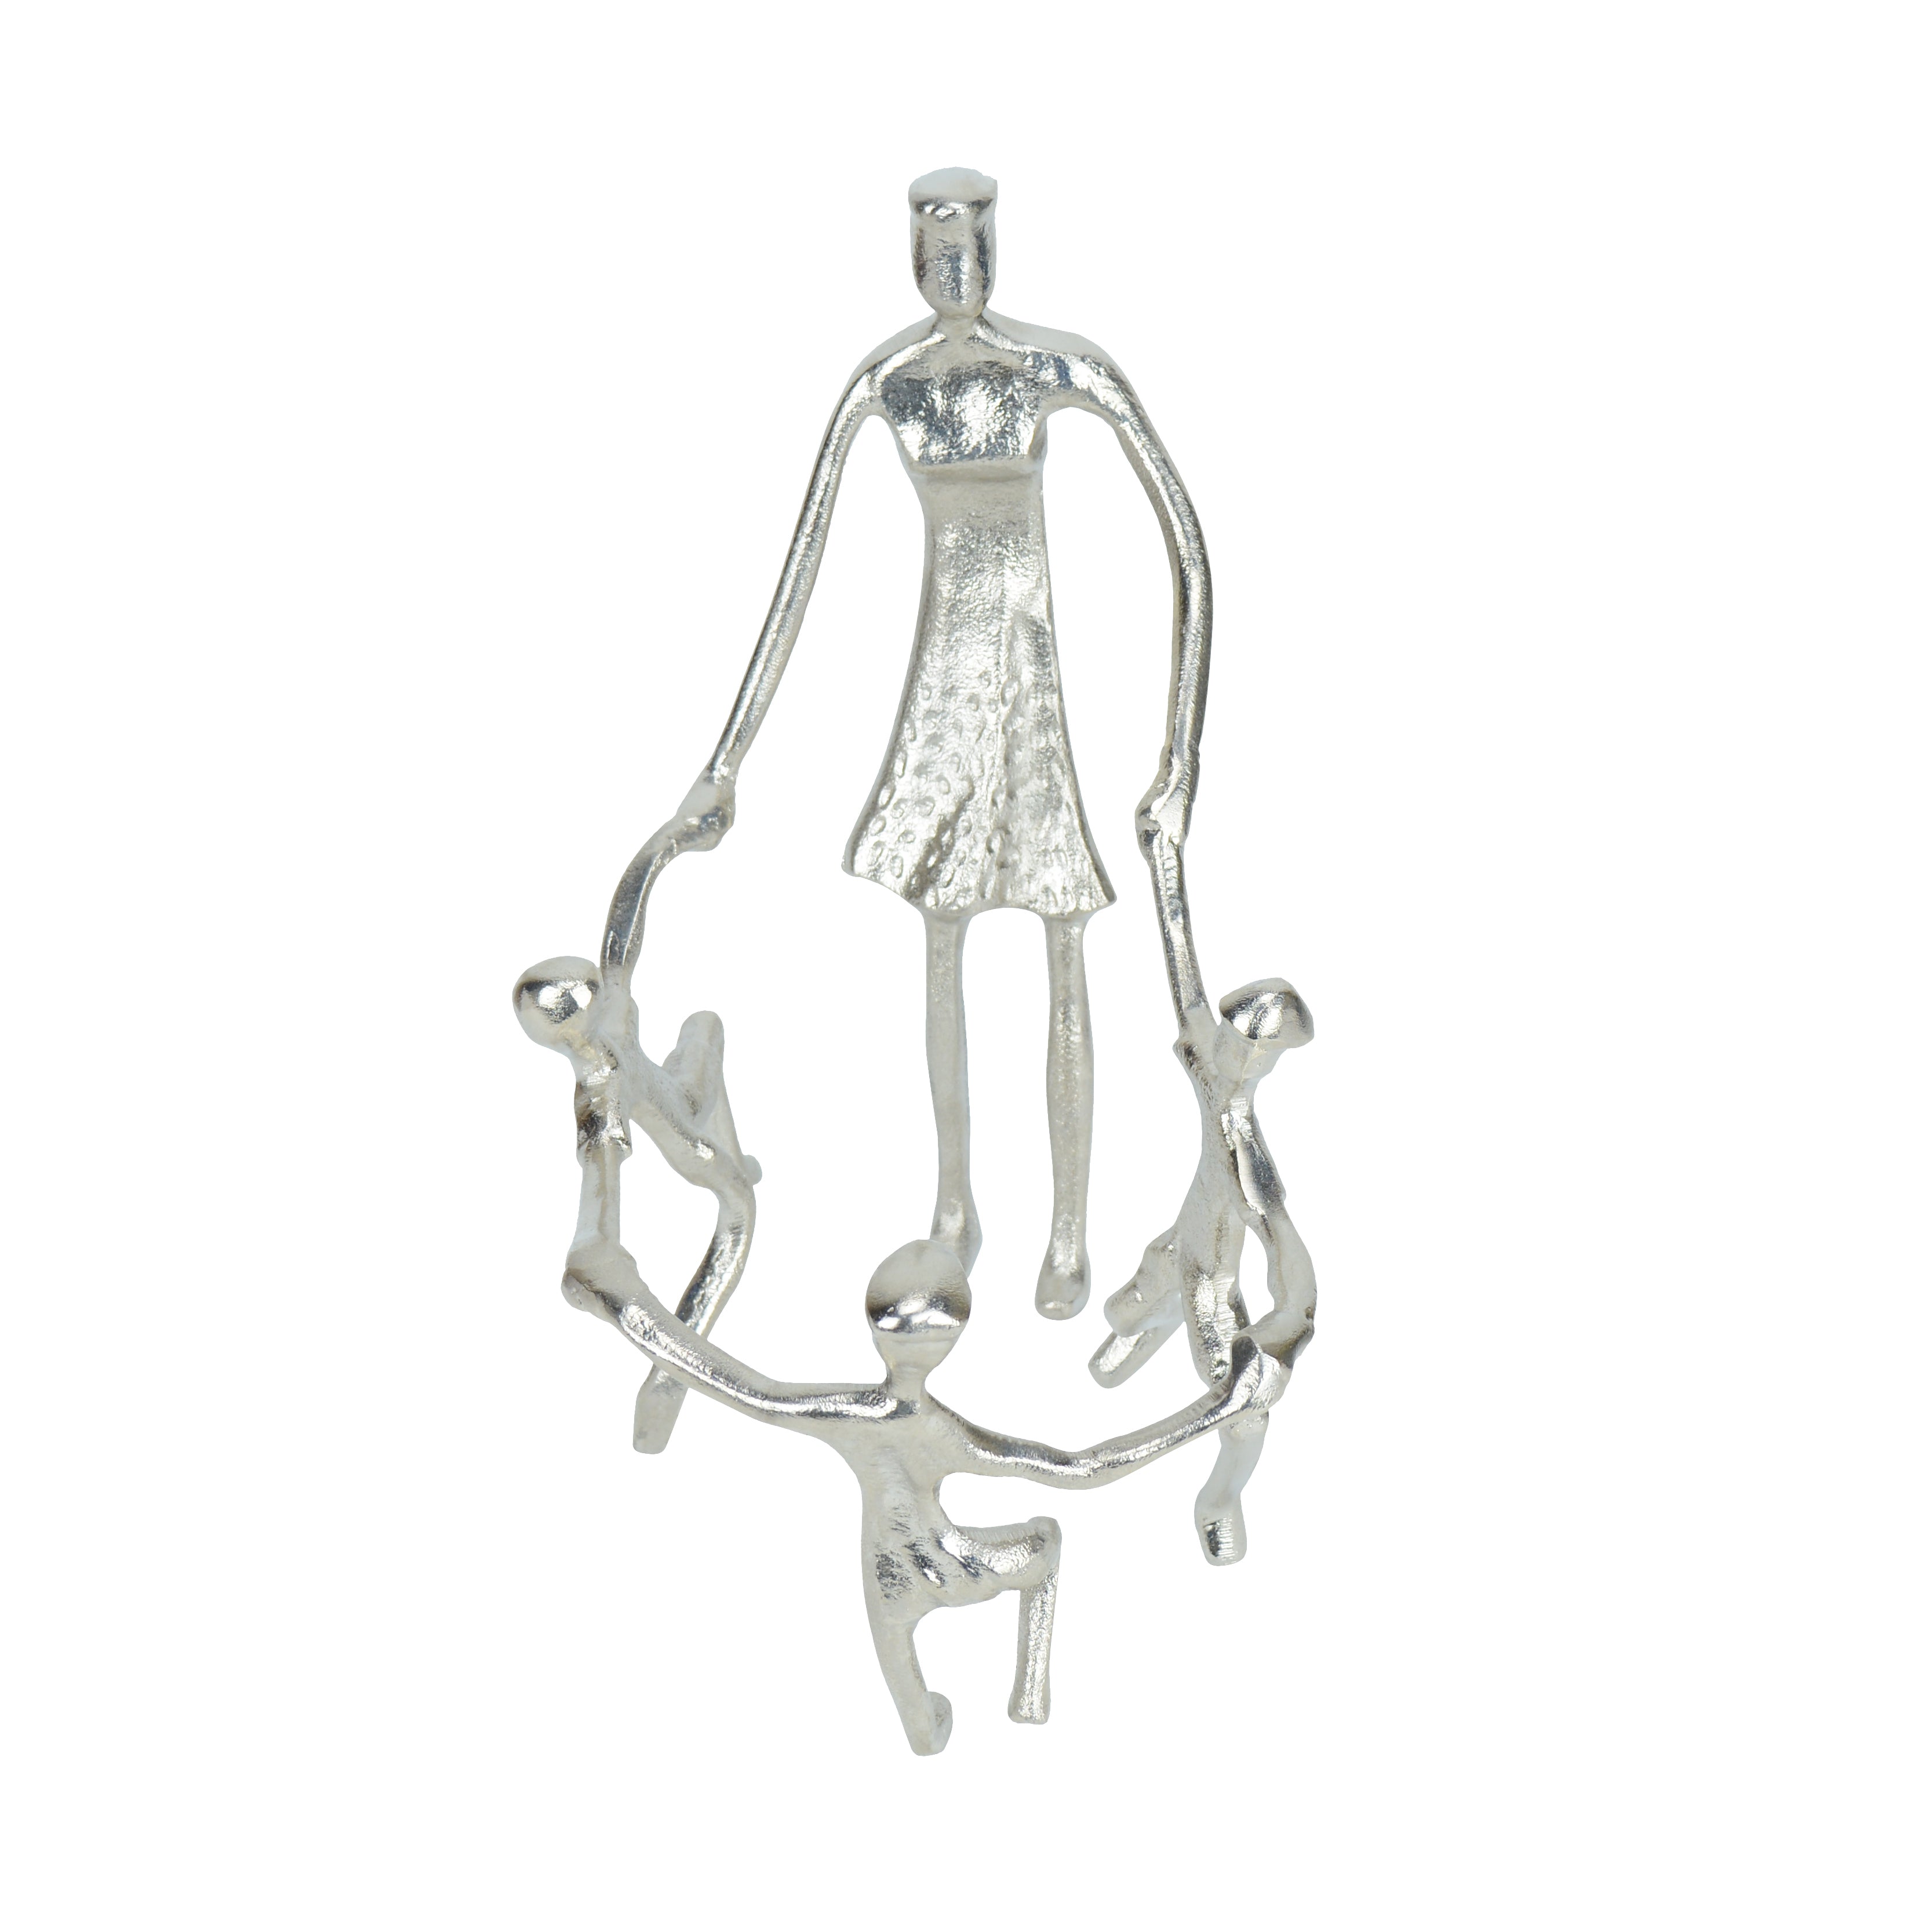 Togetherness Mother and Kids Silver Sculpture